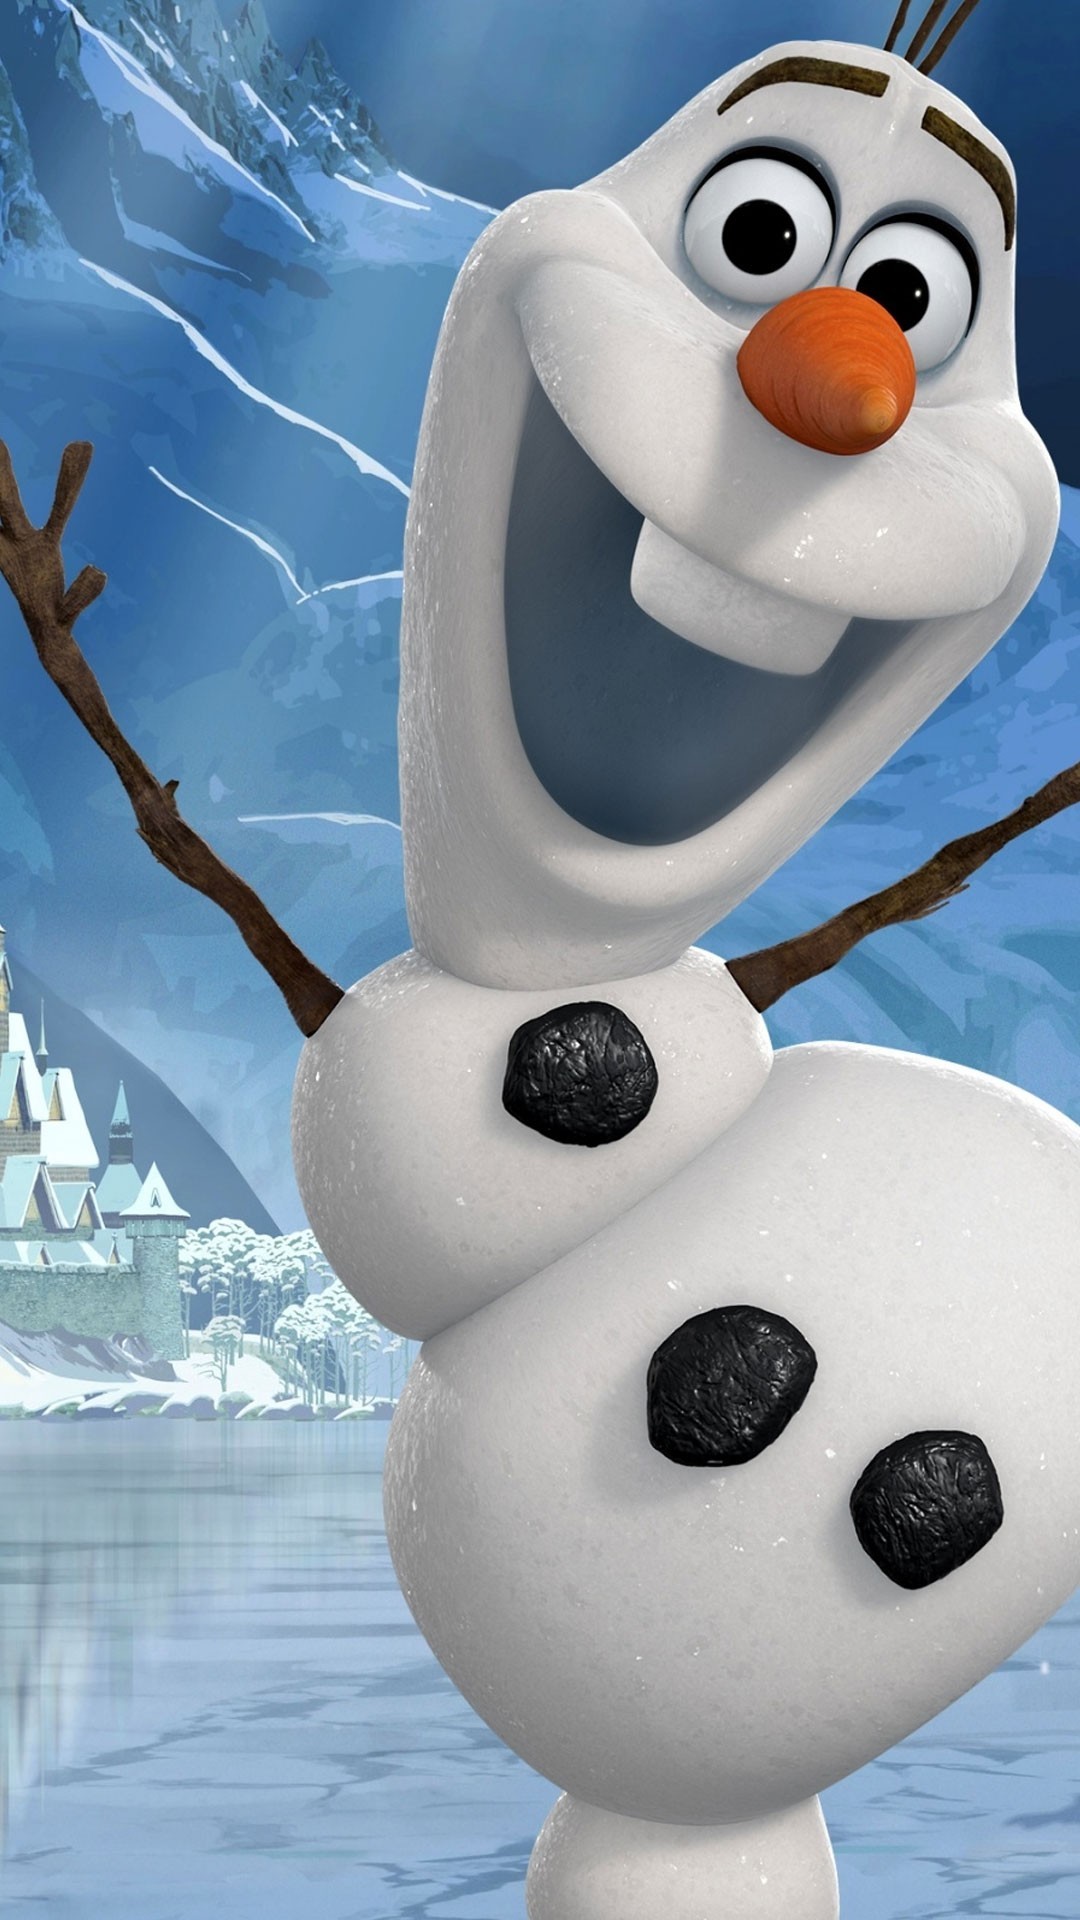 1080x1920 Funny 2014 Christmas Frozen iPhone 6 Plus Wallpapers - Disney Olaf for  Girls #2014 #